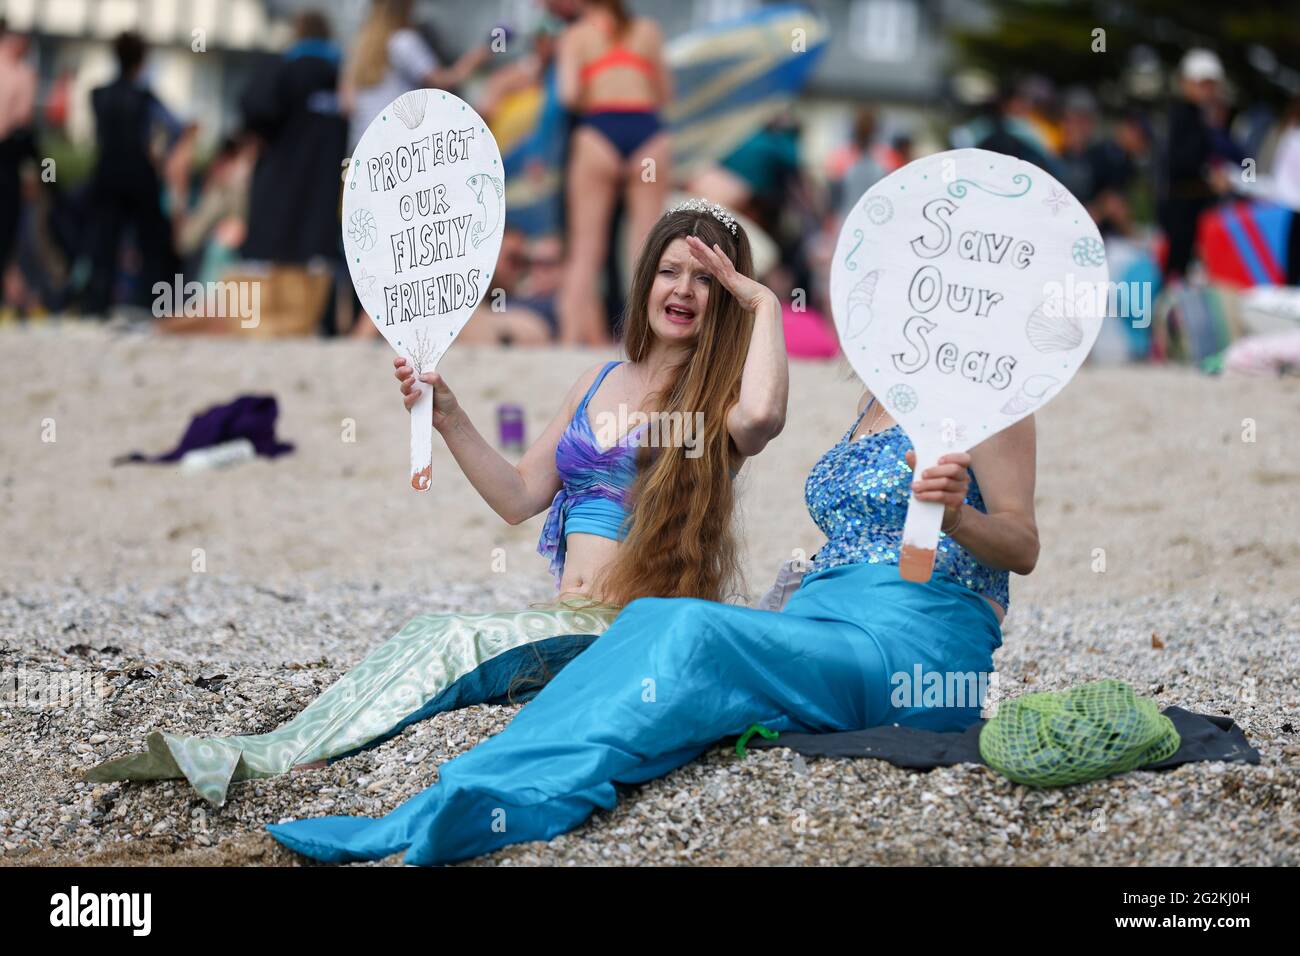 Demonstrators hold signs in a protest in Gyllyngvase beach, Falmouth, during the G7 summit in Cornwall, Britain, June 12, 2021. REUTERS/Tom Nicholson Stock Photo